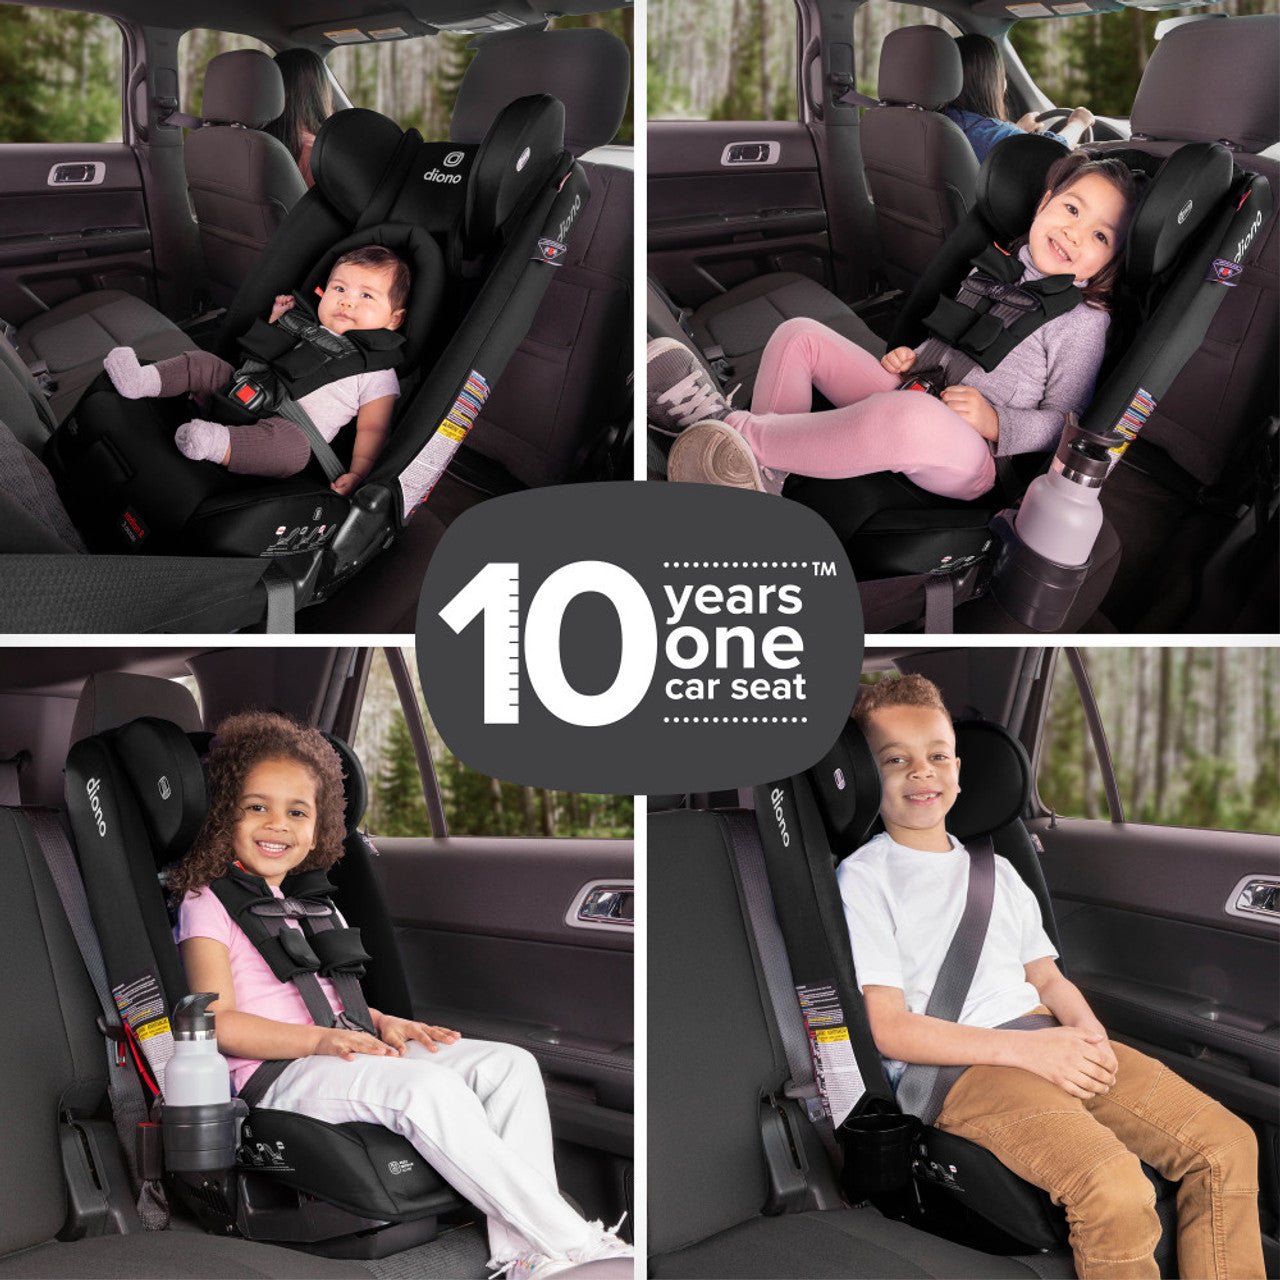 Diono Radian 3RX Latch All-in-One Convertible Car Seat, -- ANB Baby